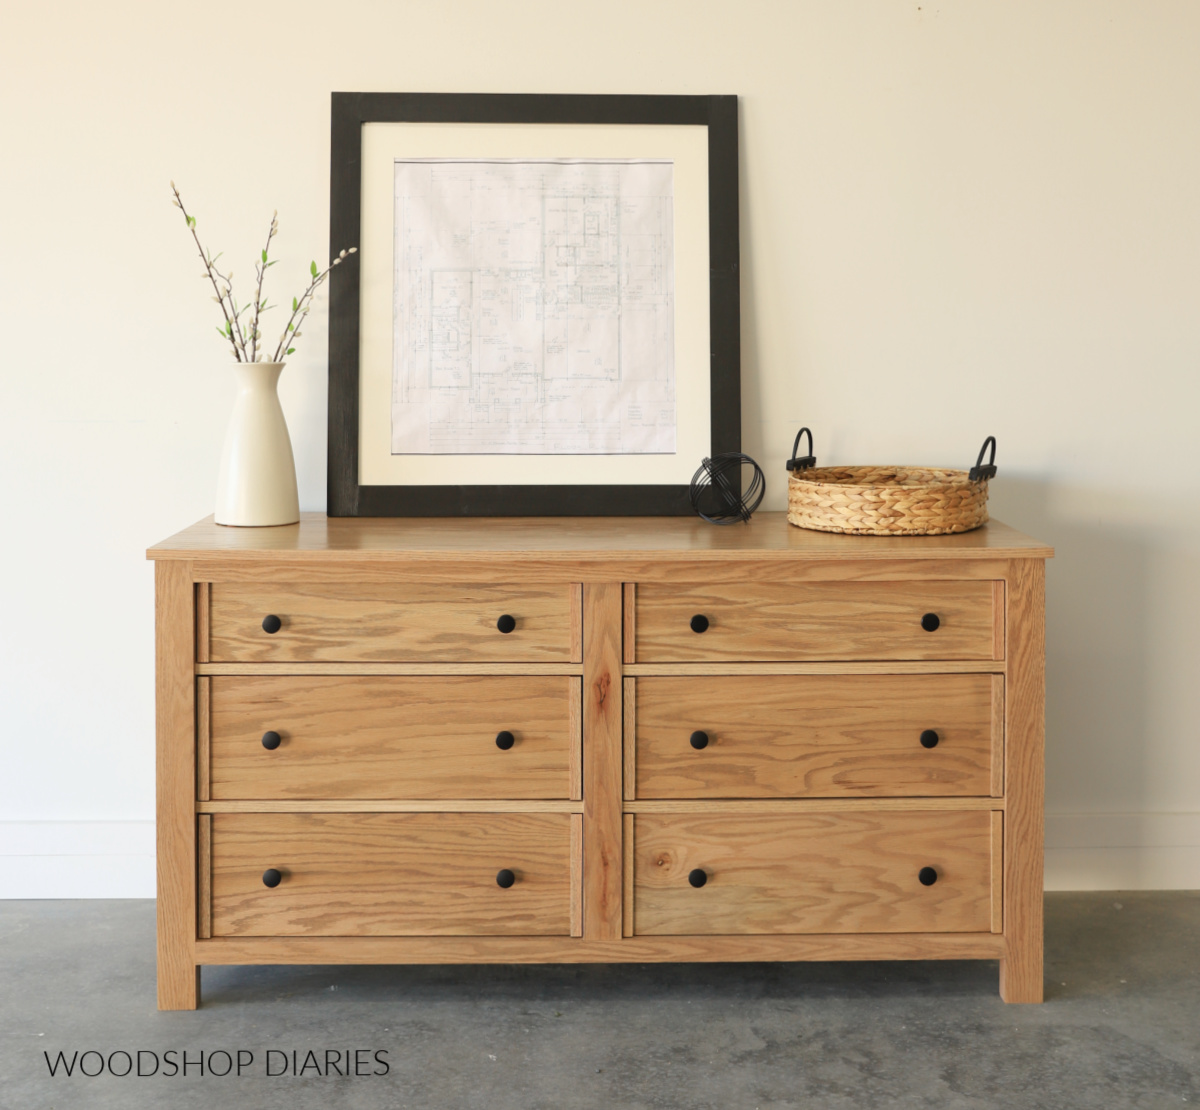 Red oak 6 drawer dresser with 4 larger bottom drawers and 2 smaller top drawers against white wall with vase, basket and framed photo on top